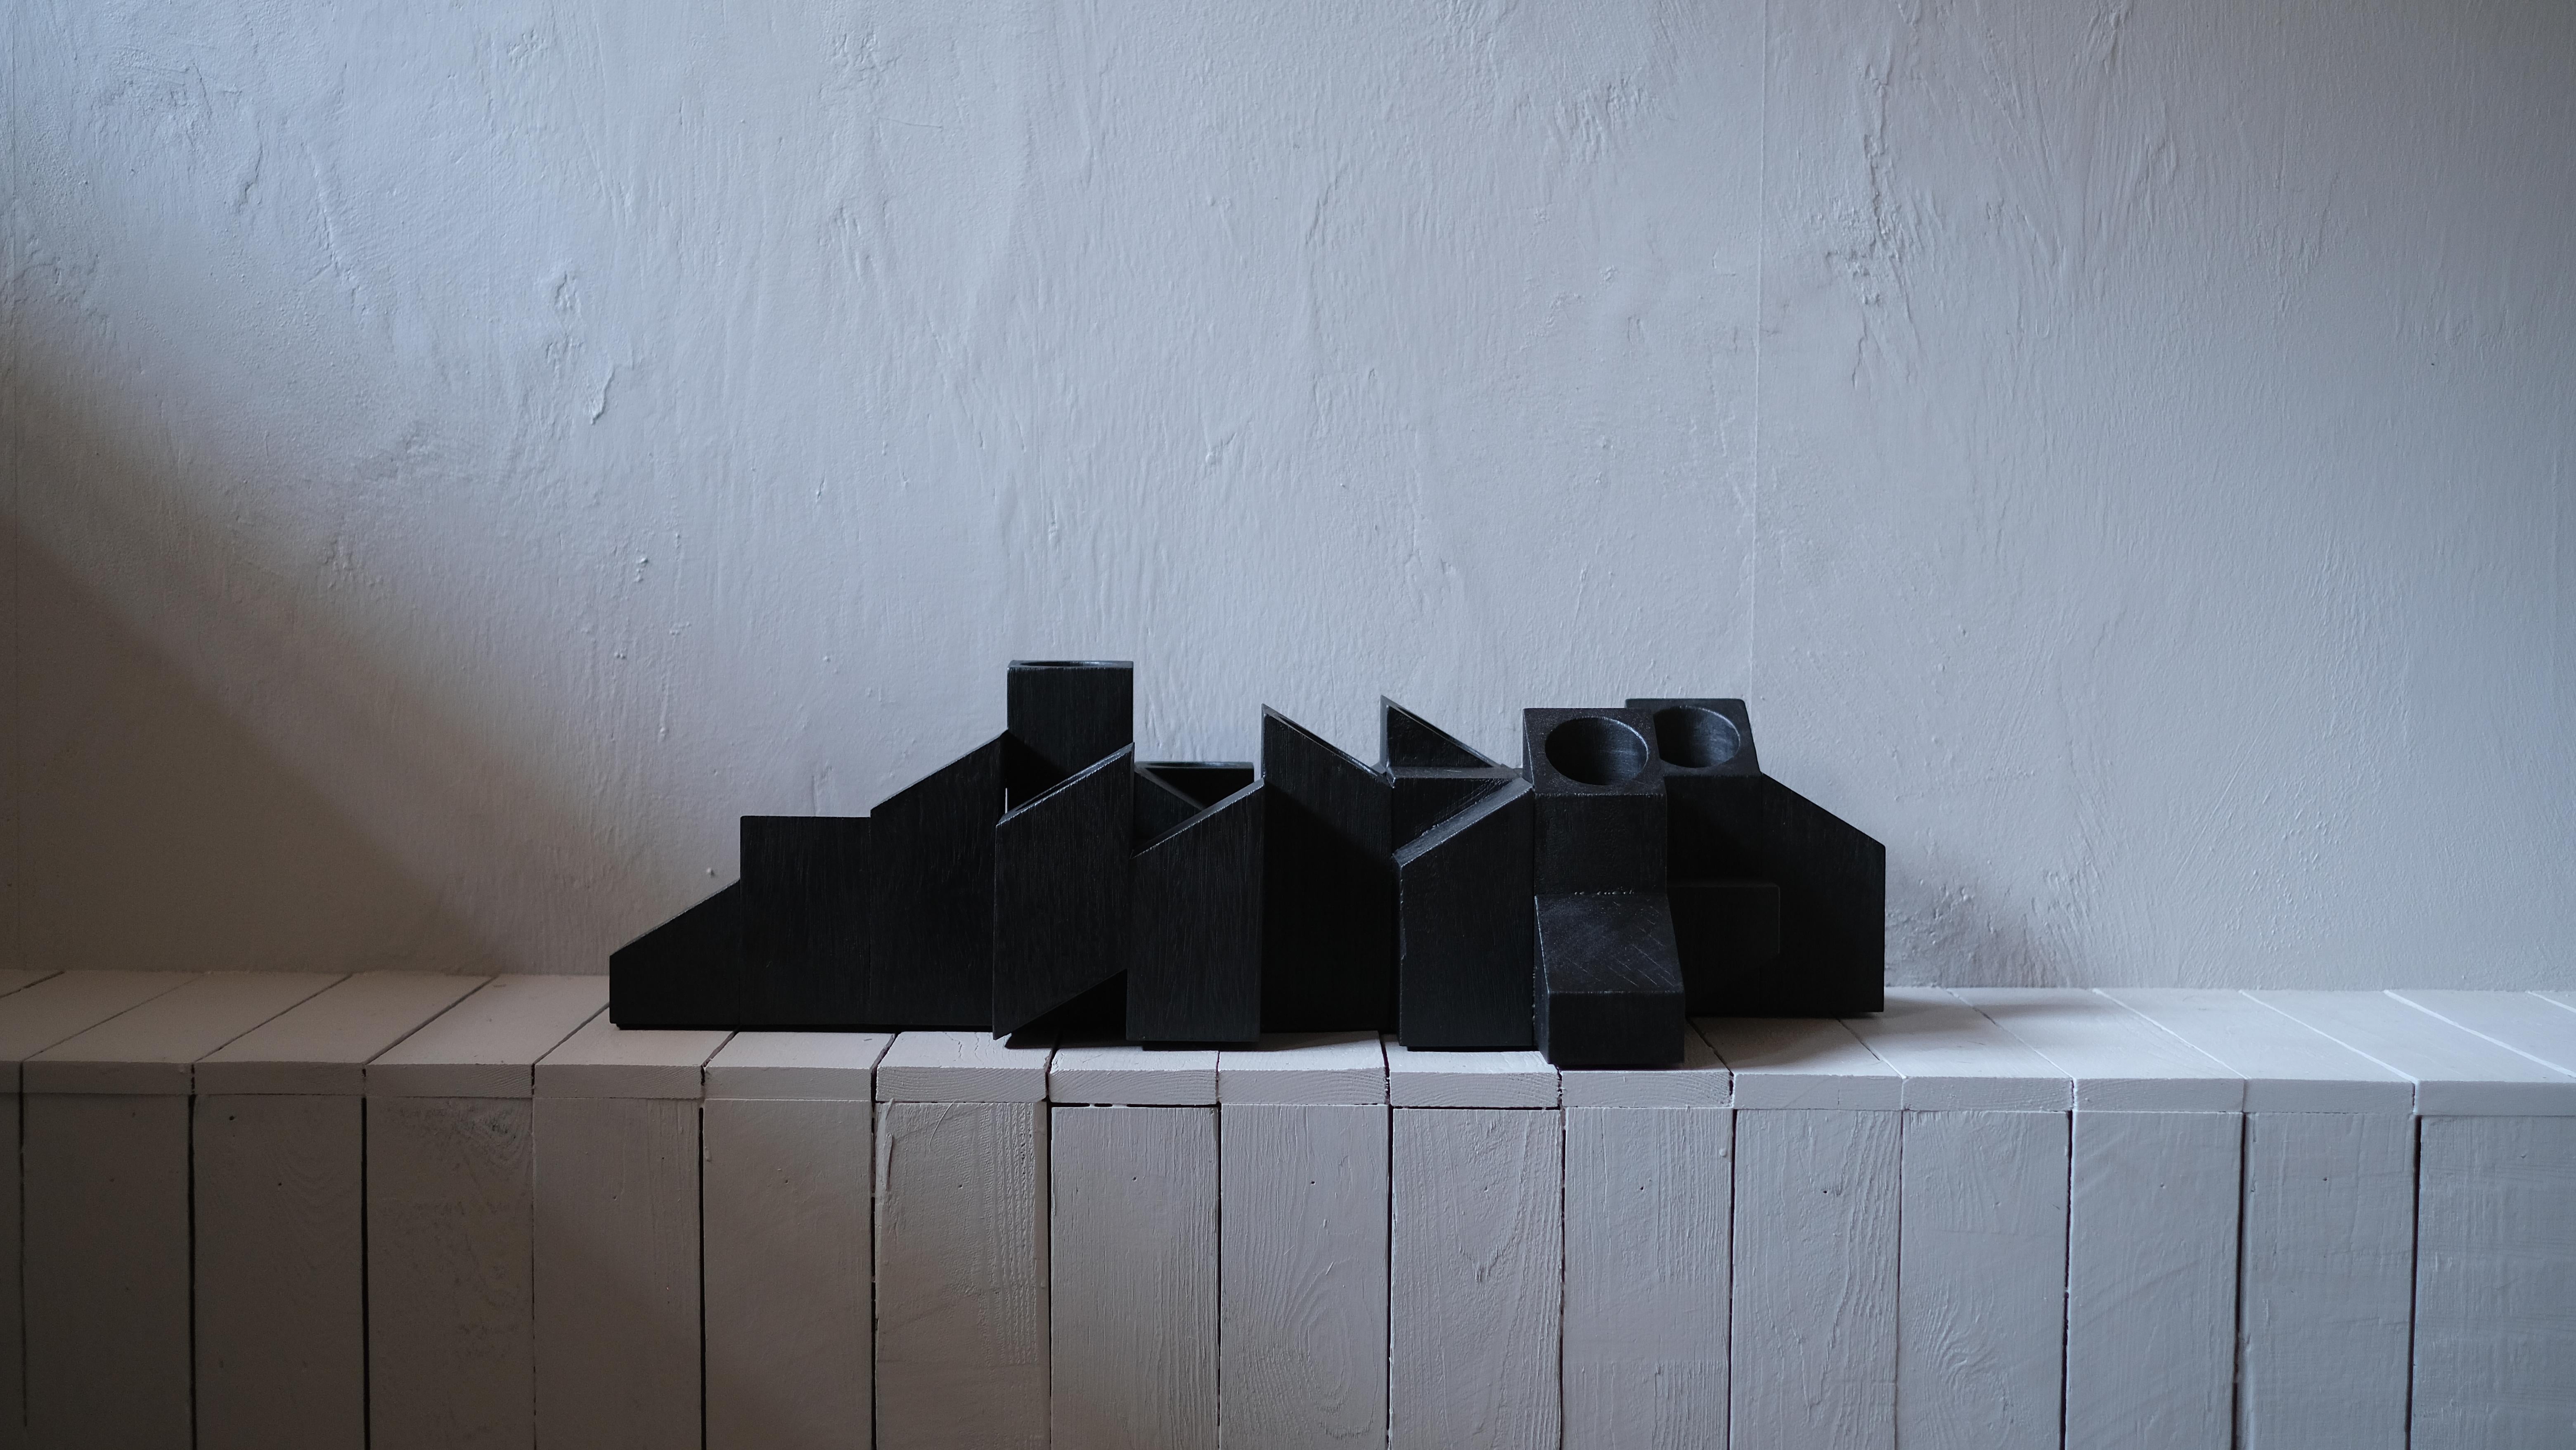 Black skyline candle light in iroko wood by Arno Declercq
Dimensions: D 40 x W 80 x H 20 cm
Materials: Burned and oiled African walnut

Arno Declercq
Belgian designer and art dealer who makes bespoke objects with passion for design, atmosphere,